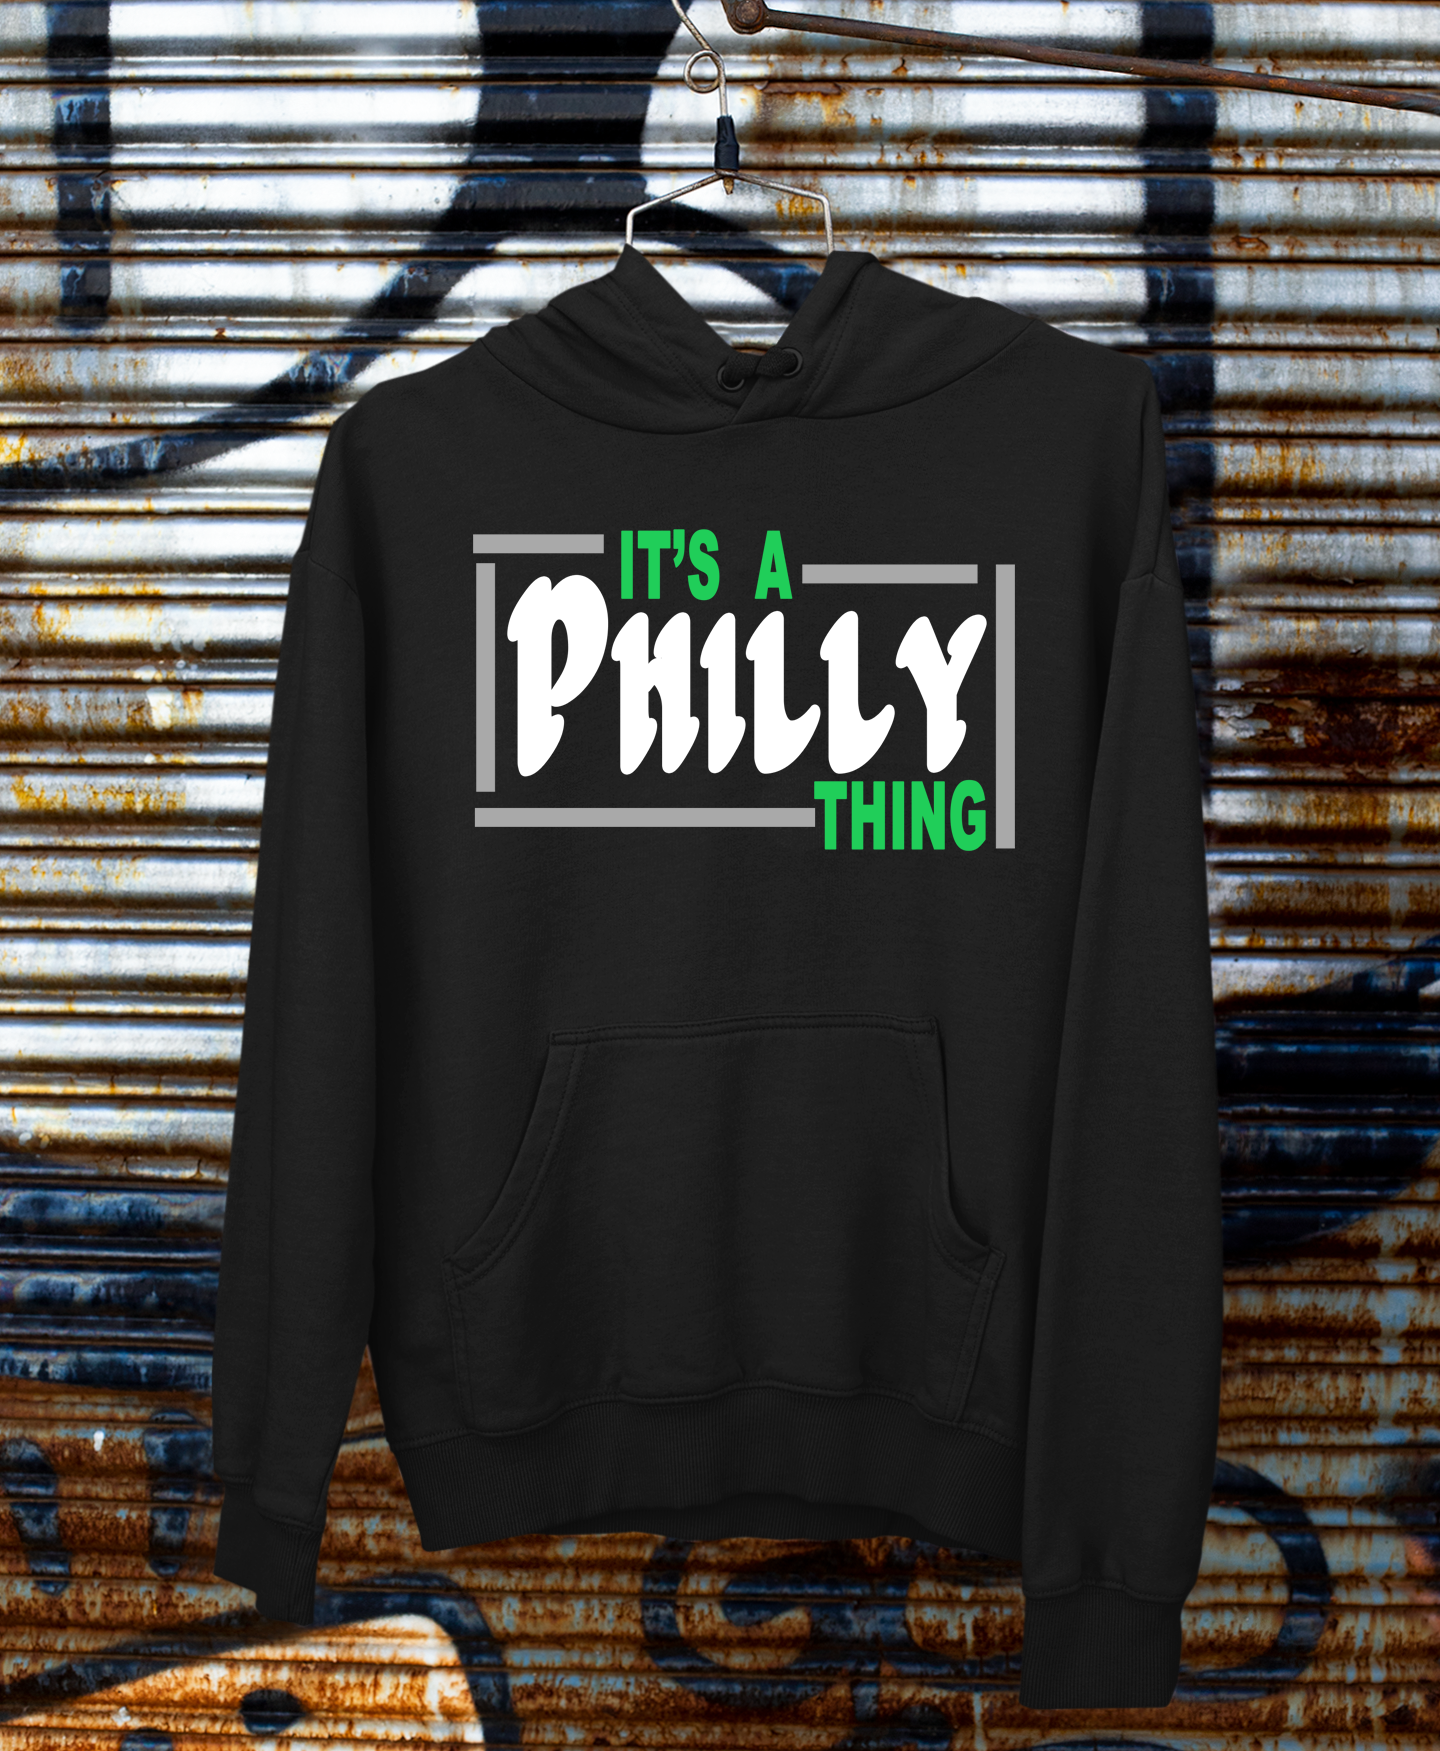 It's A Philly Thing Eagles Sweatshirts And Hoodies - Jolly Family